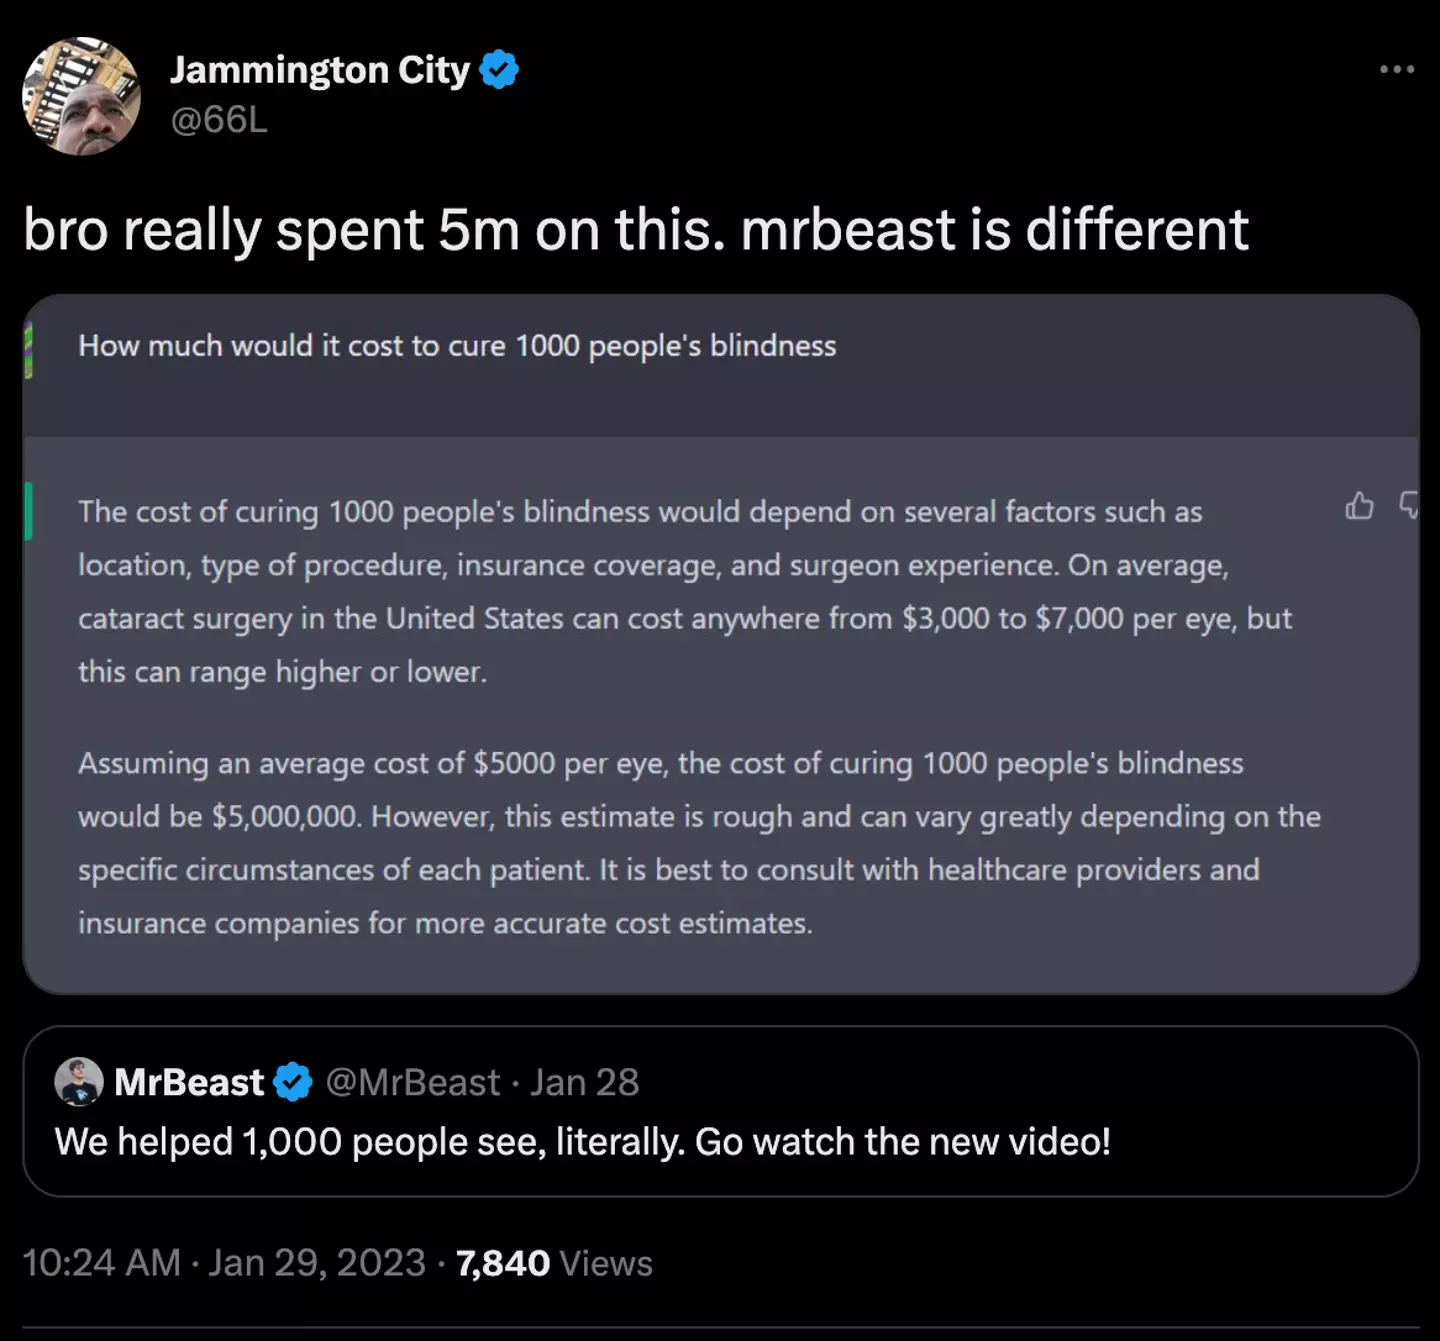 MrBeast likely spent around $5 million giving 1,000 people their sight.